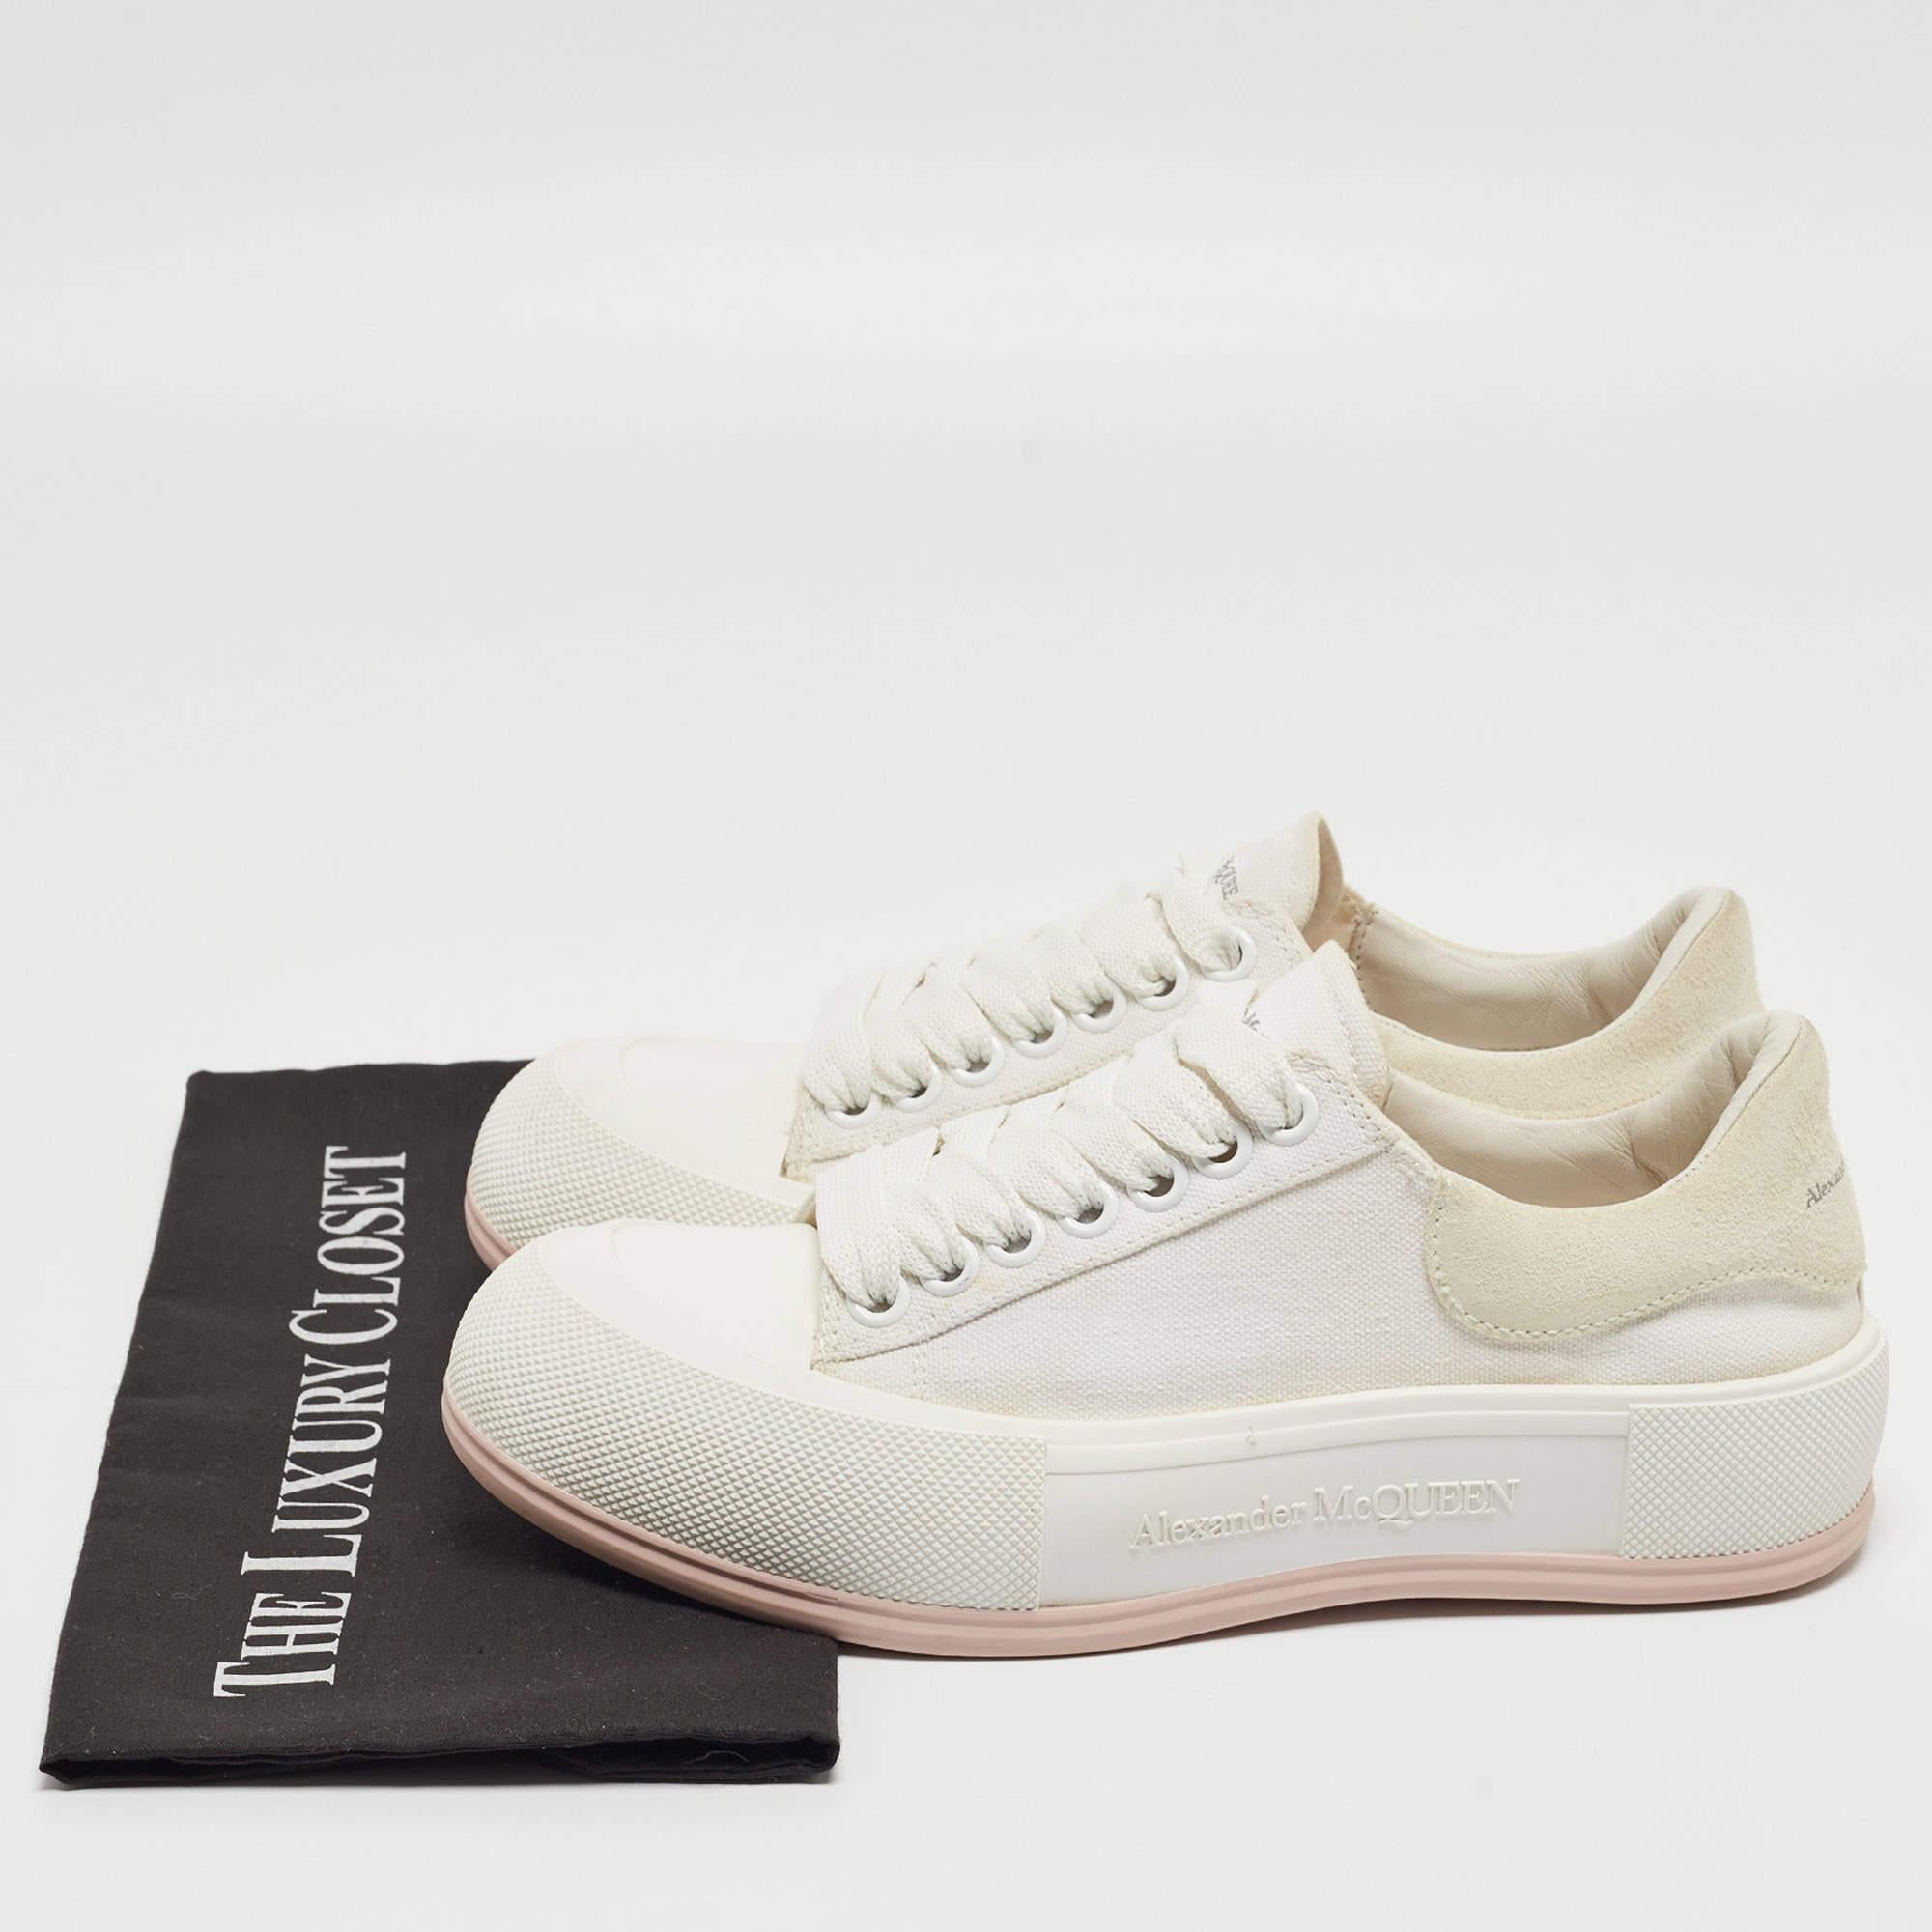 Alexander McQueen White/Grey Suede and Canvas Low Top Sneakers Size 37 For Sale 5